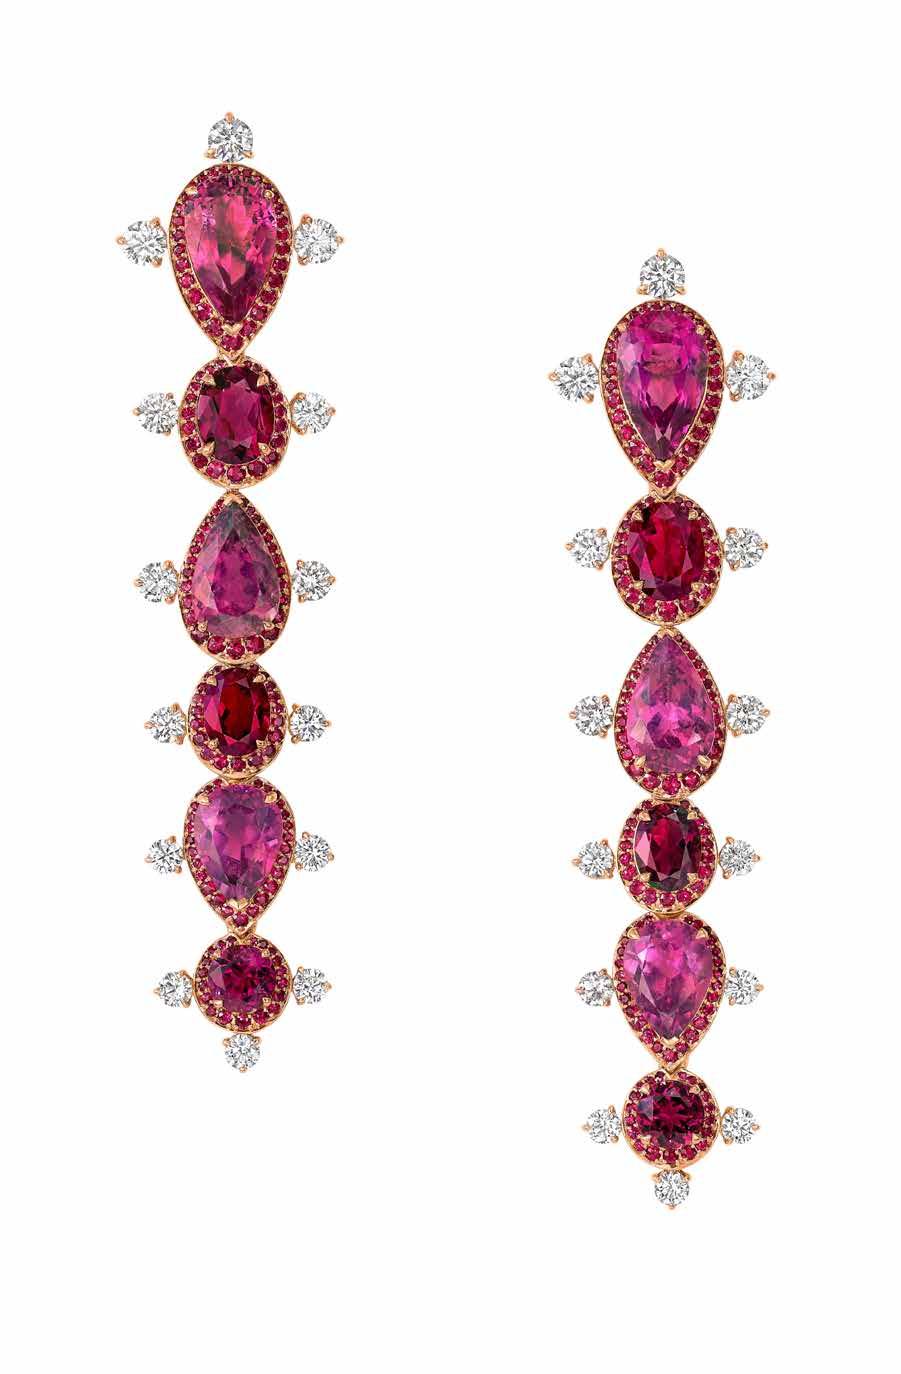 While a celebration of Mozambique s rubies and rubellites, mostly from Gemfields Montepuez ruby mine, this limited edition capsule collection offers